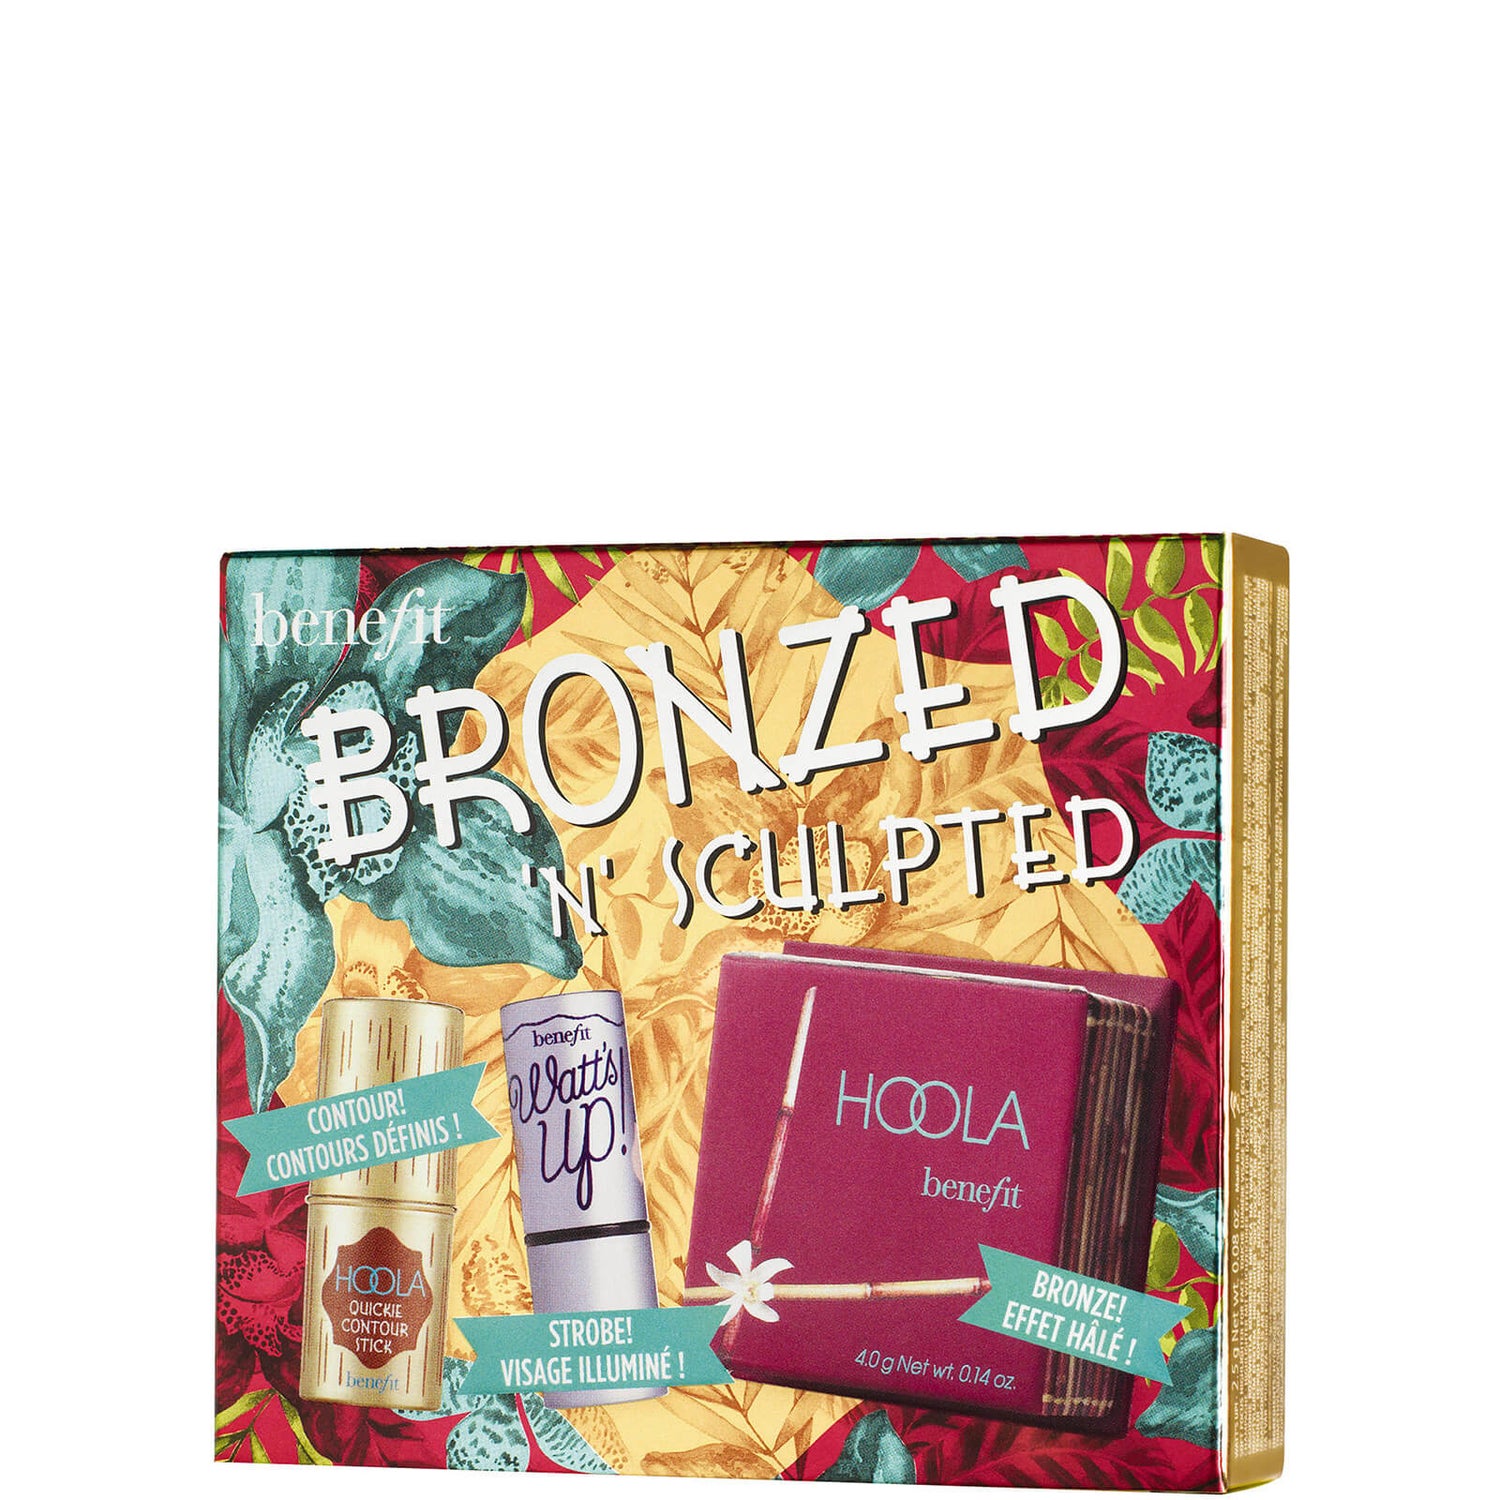 benefit Bronzed 'n' Sculpted